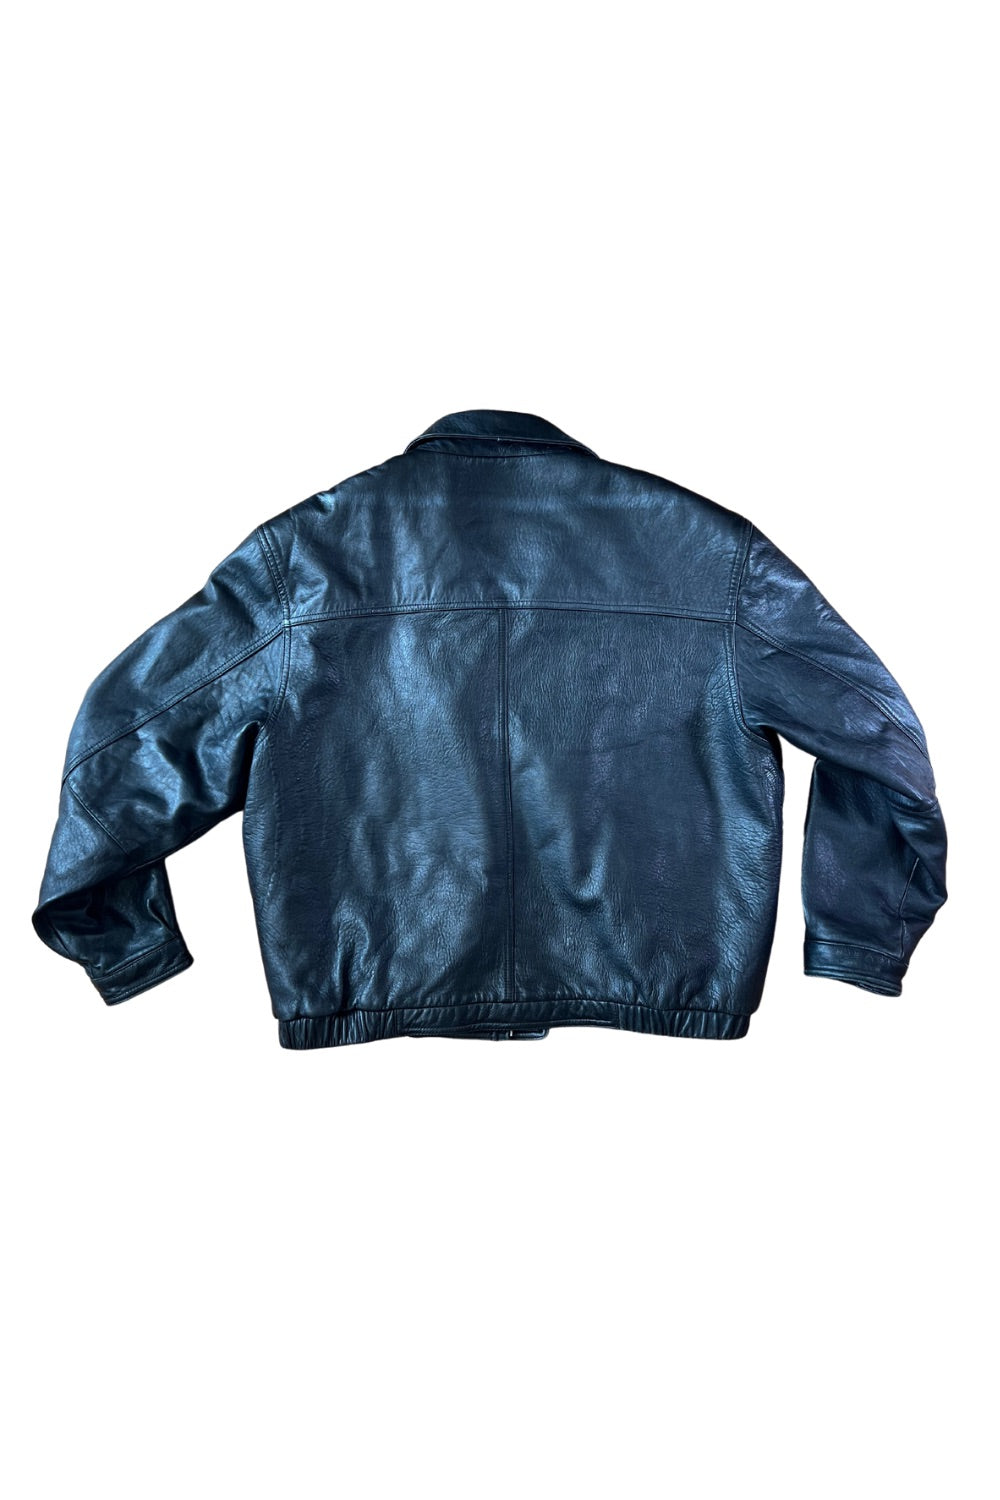 Vintage Members Only Leather Bomber